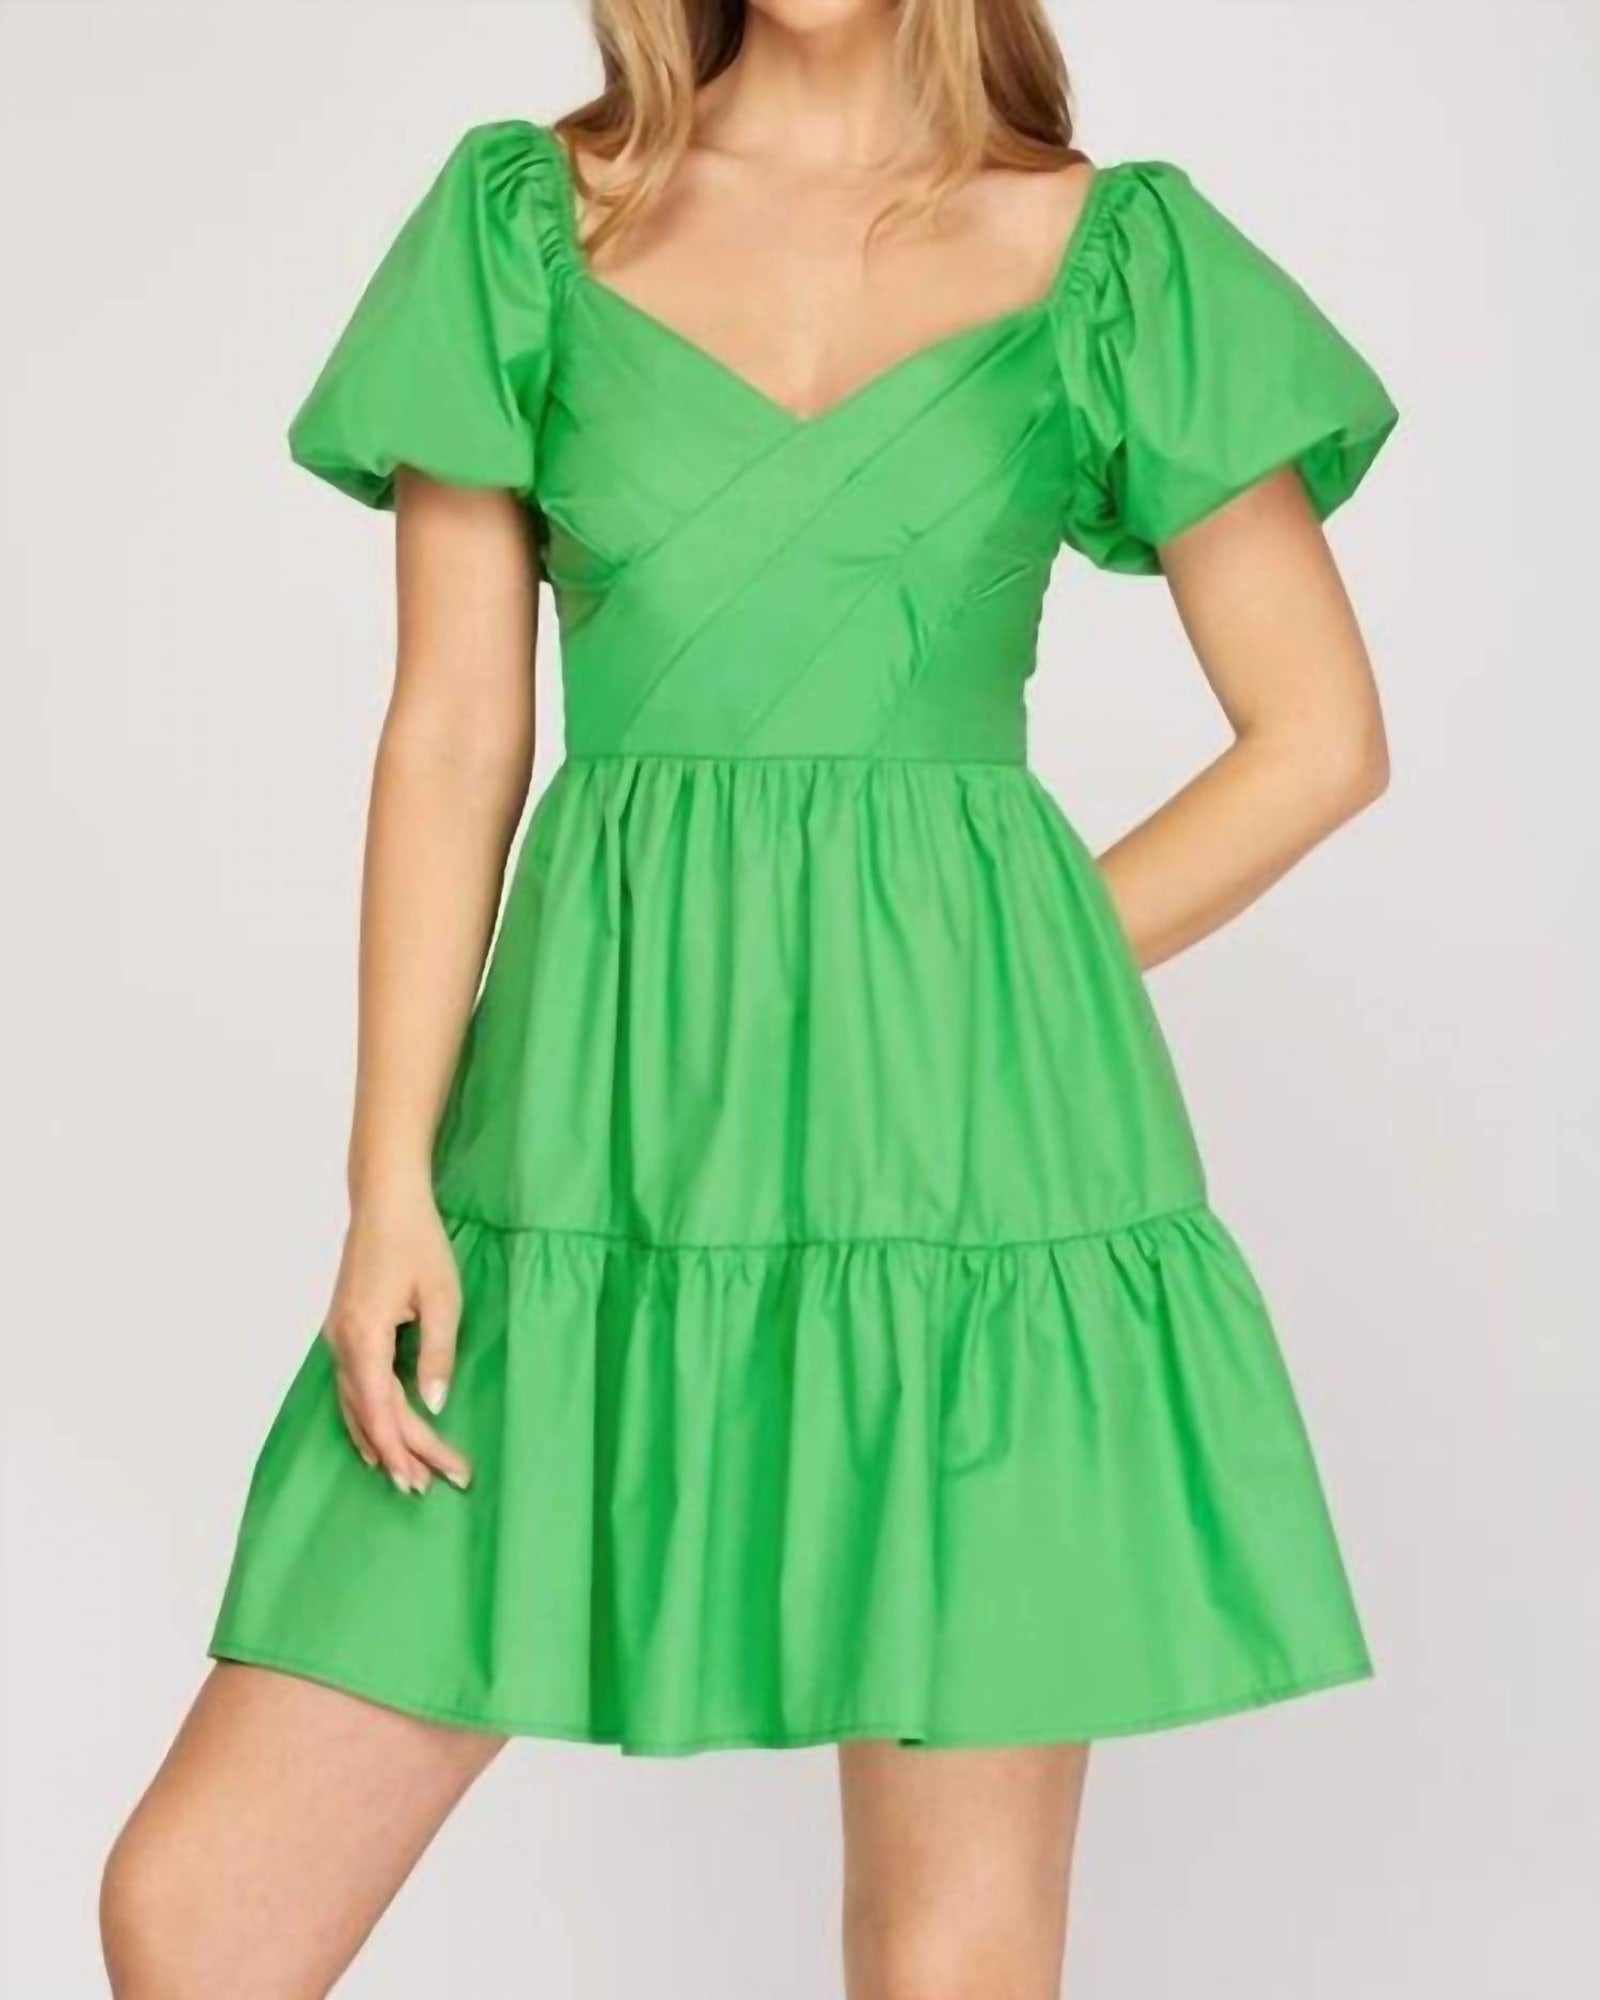 Plus Size Summer One Piece Birthday Lime Green Dress For Women Elegant  Pleated Short Style Wholesale Drop From Bakacutie, $21.48